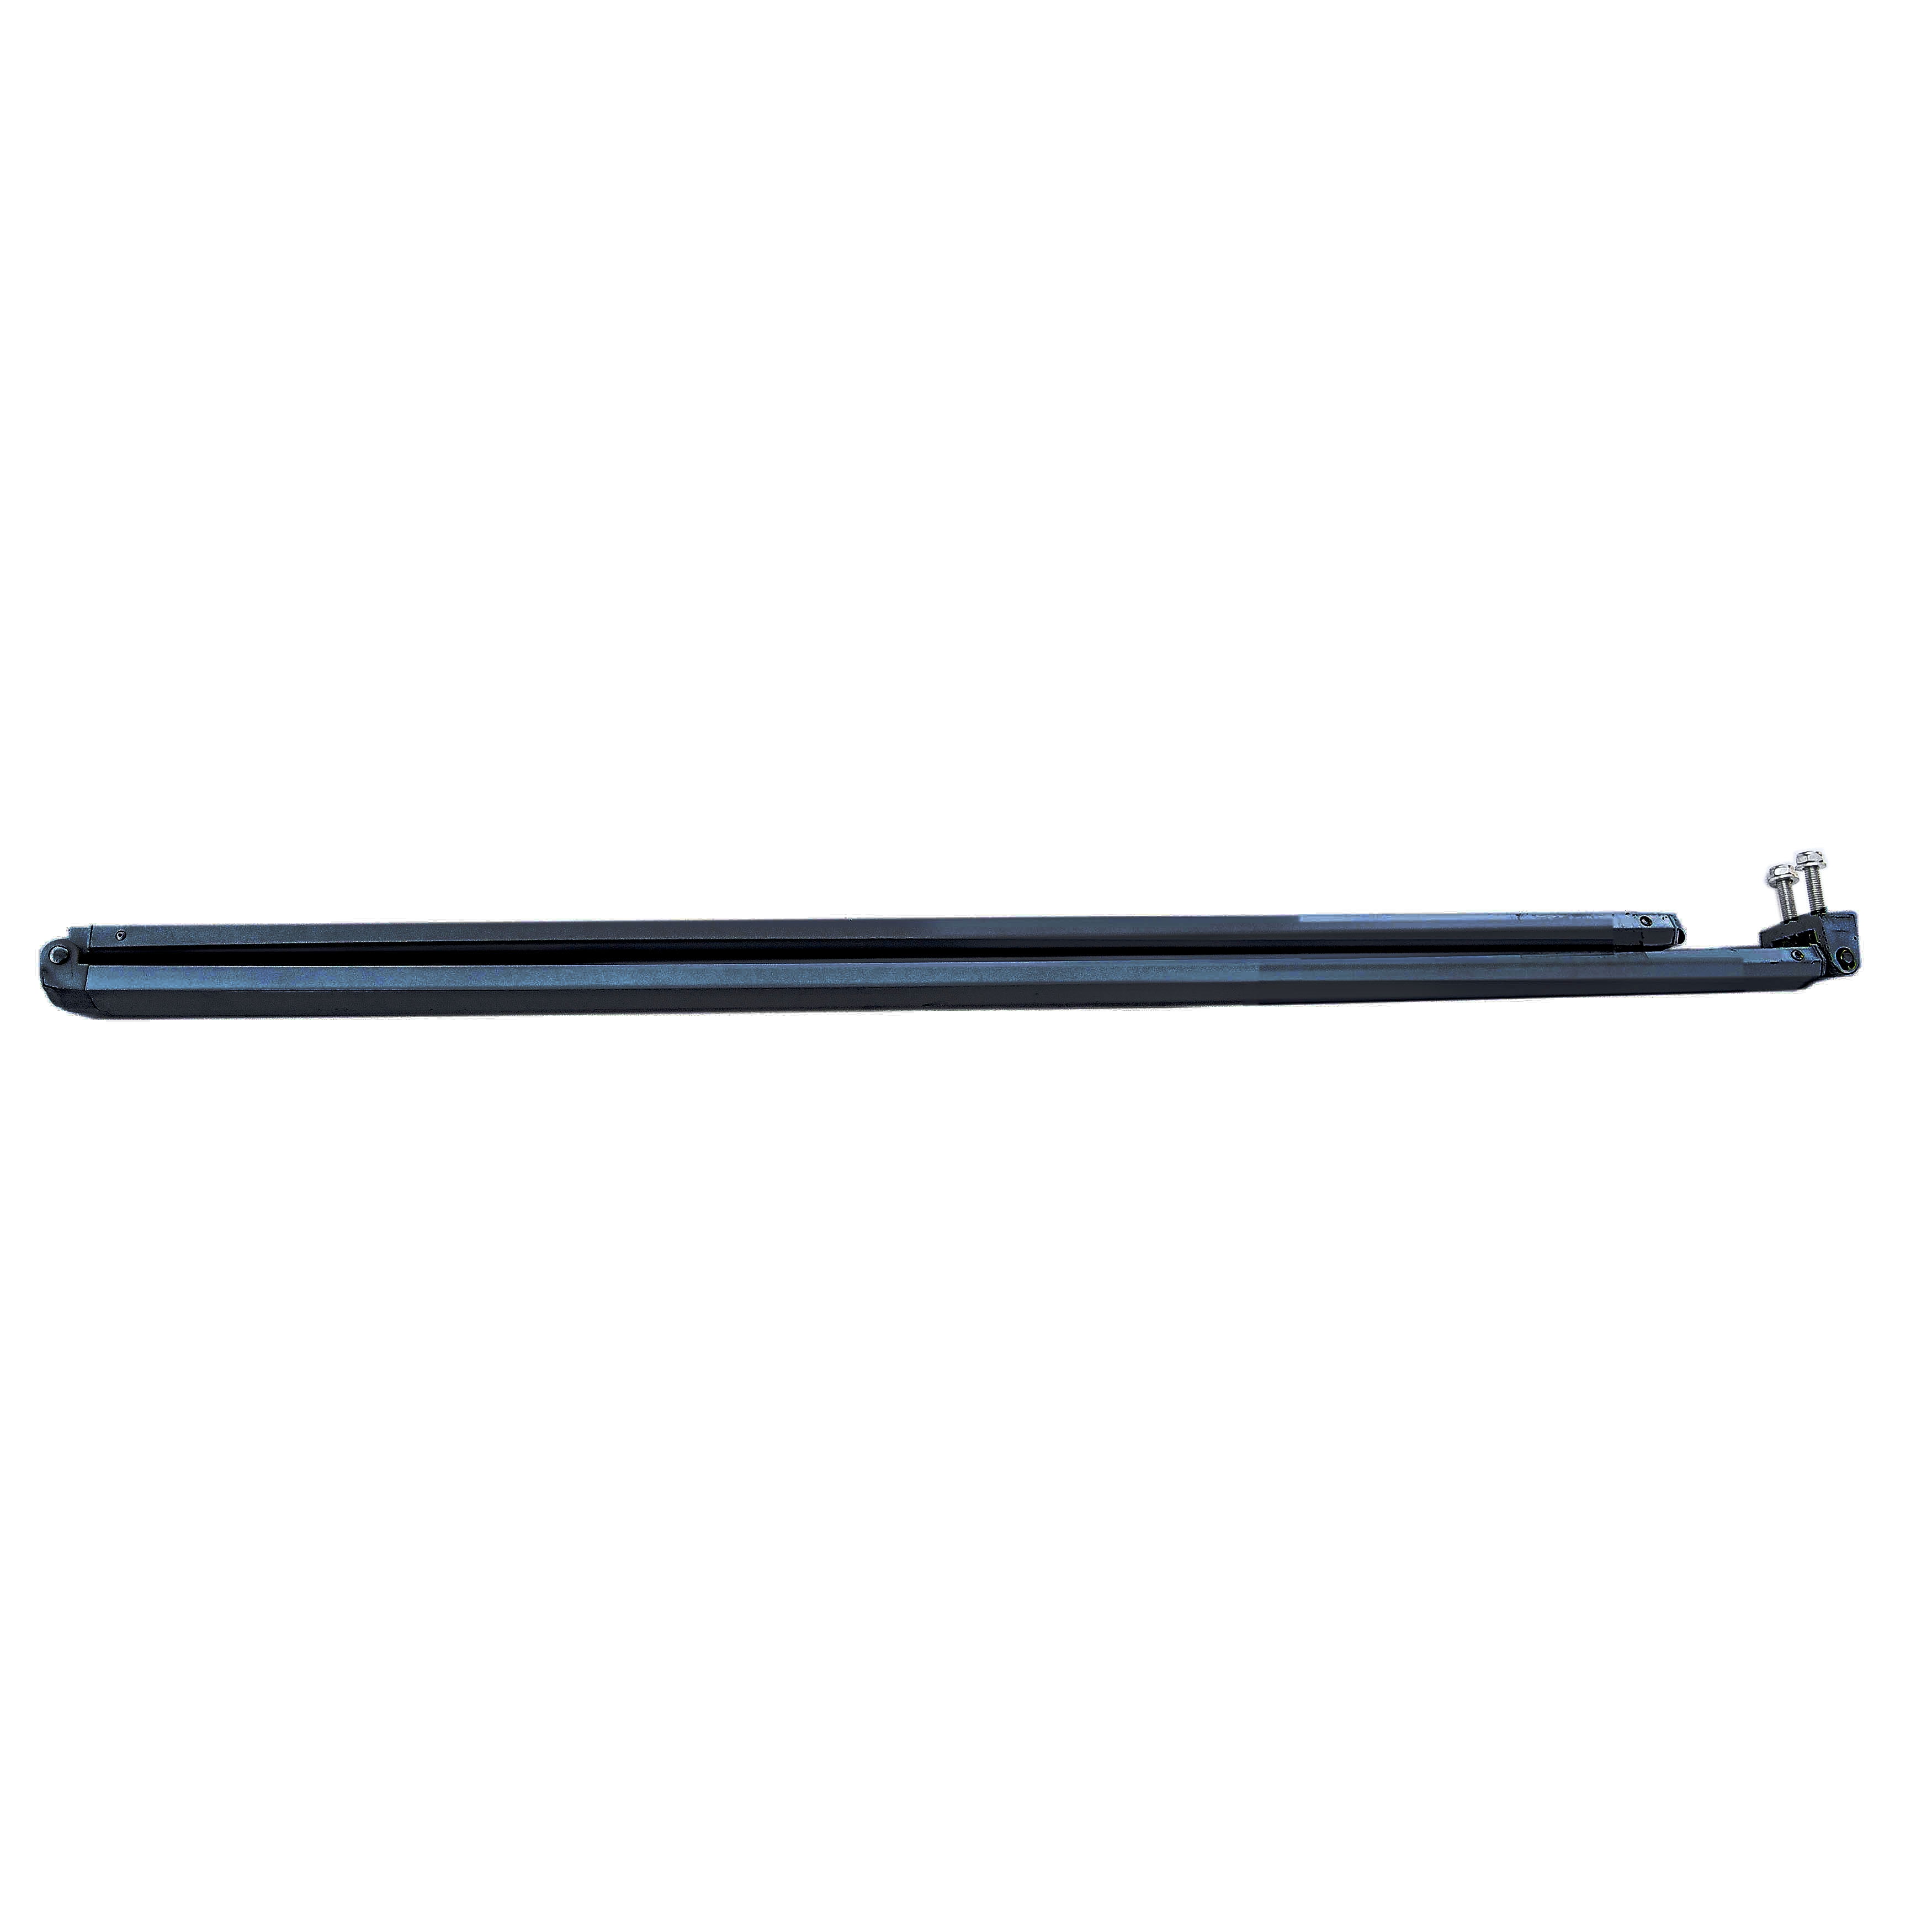 Awning Pole Awning Pole Stainless Steel 48 mm 3m with 3 ösenen Ground Sleeve 